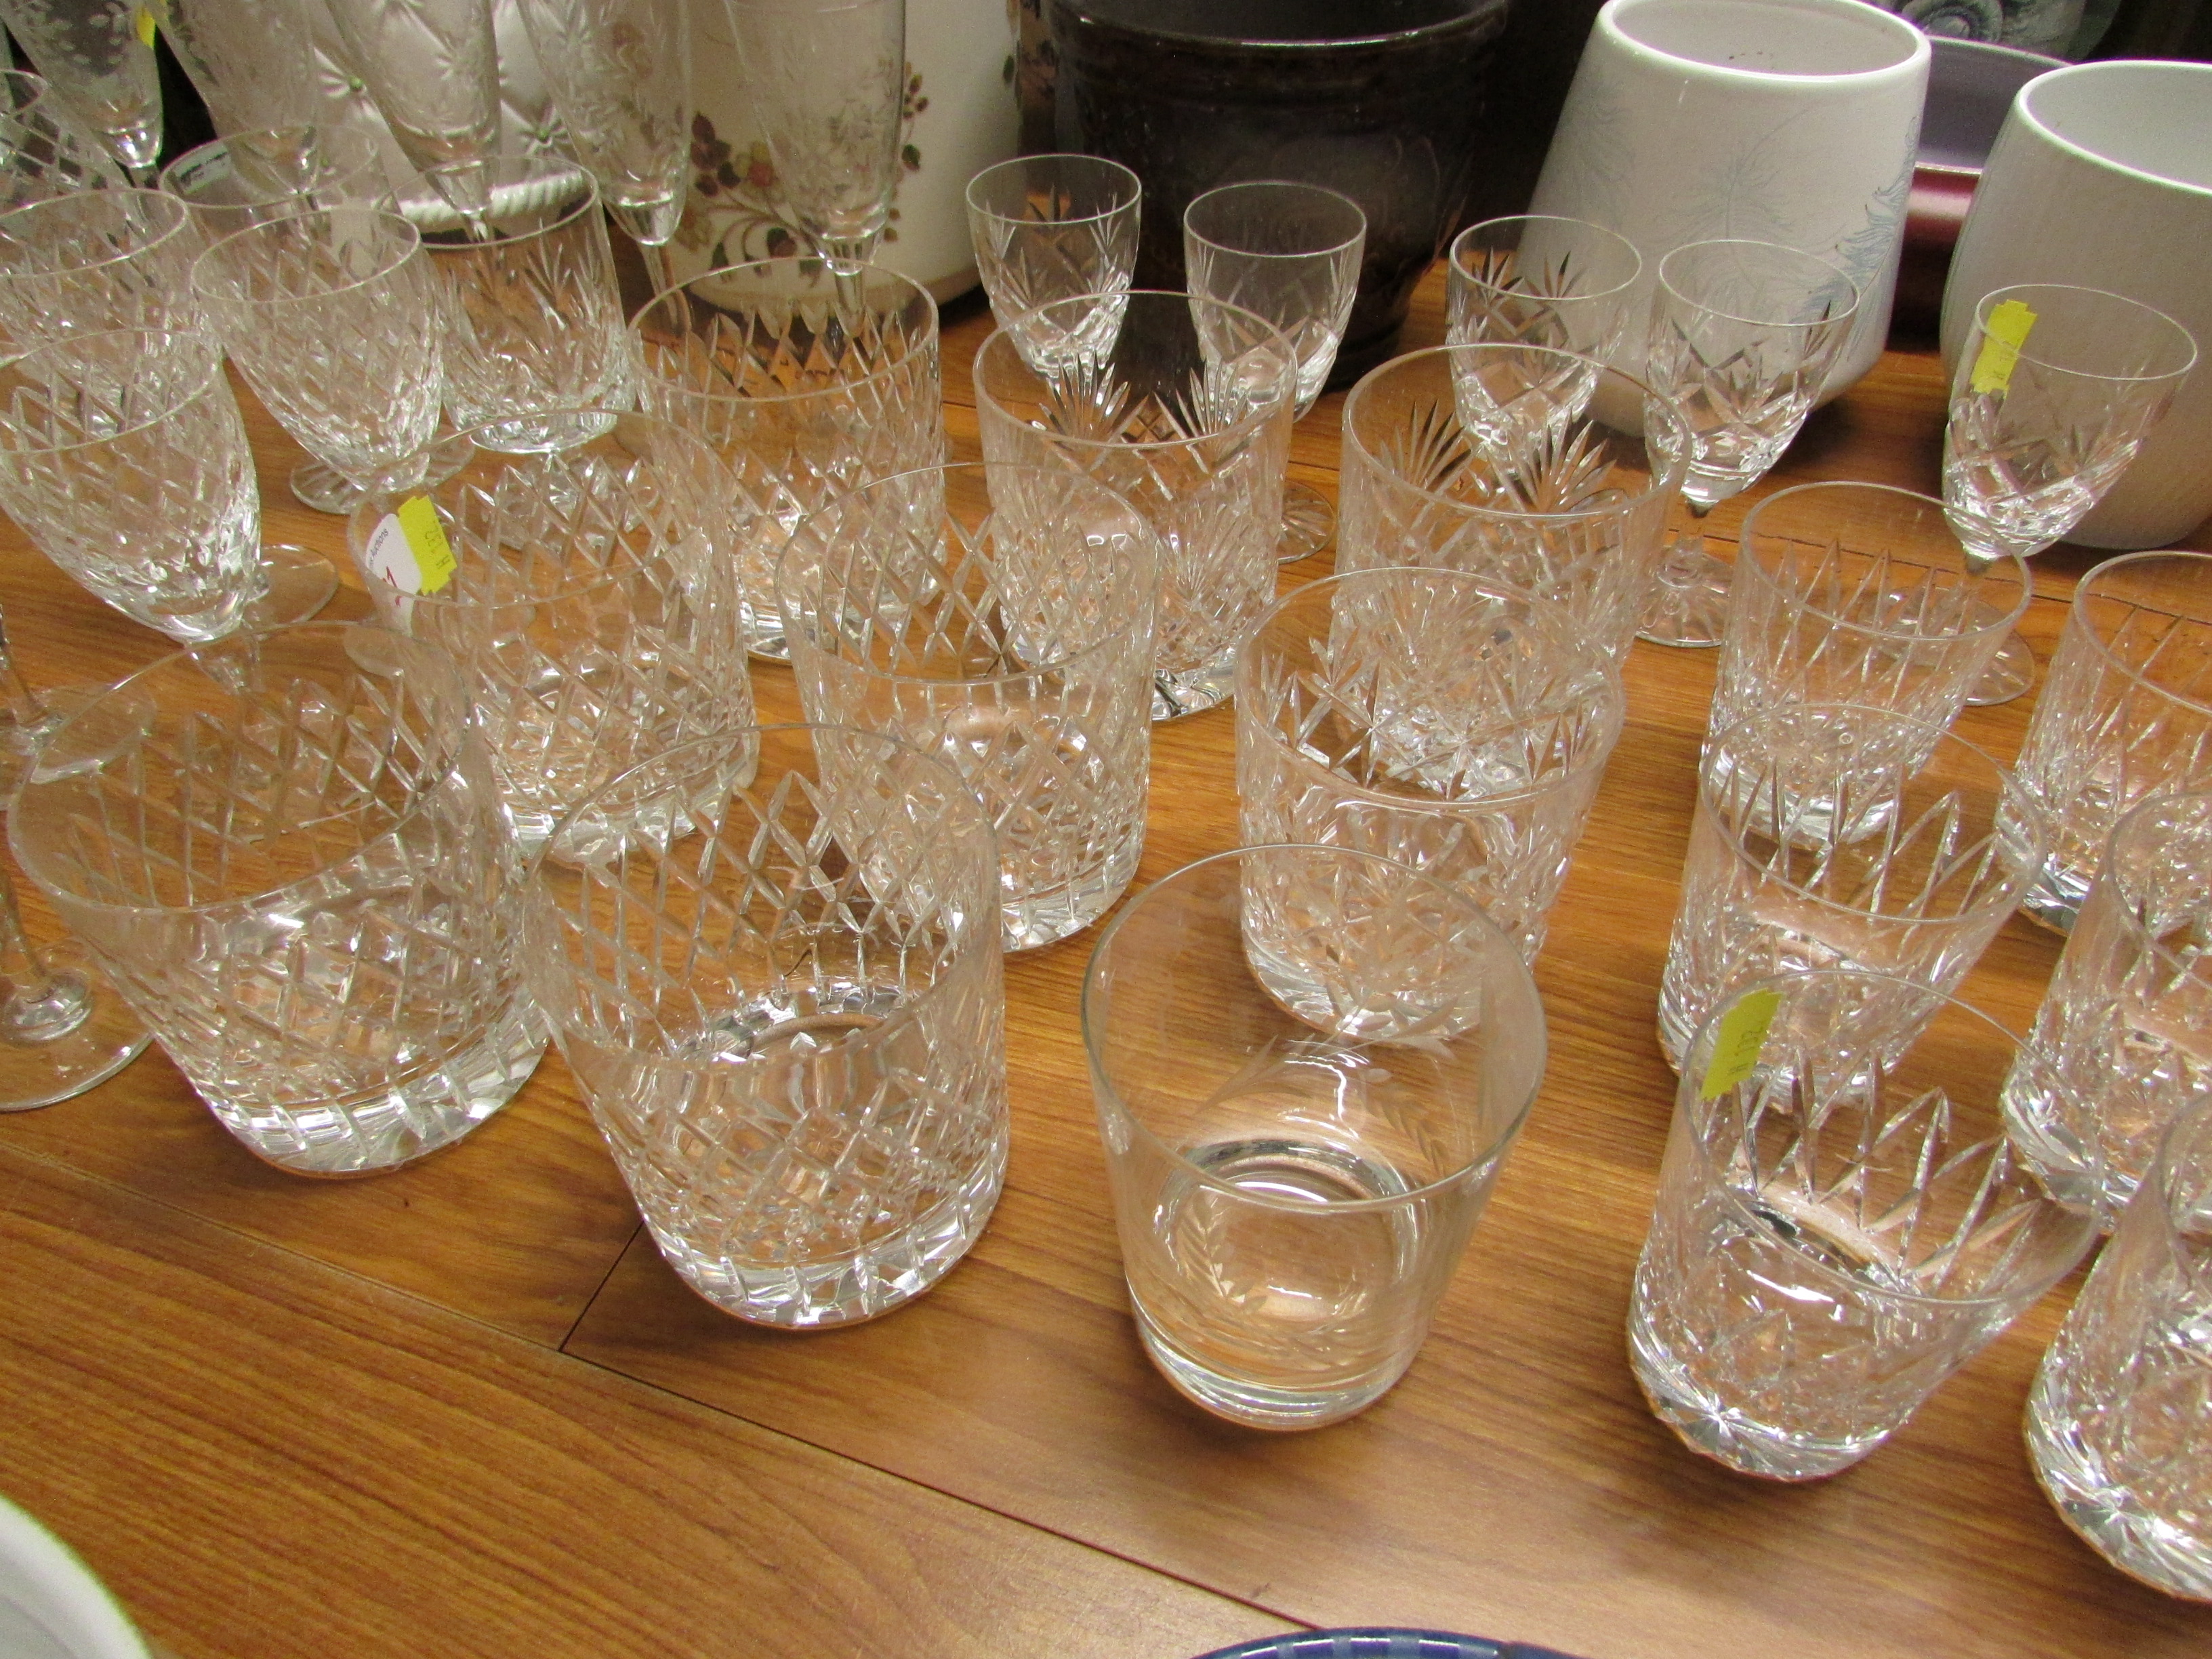 CUT GLASS DRINKING GLASSES INCLUDING ROYAL BRIERLEY BRANDY GLASSES, TUMBLERS AND SMALL WINE GLASSES - Image 3 of 4